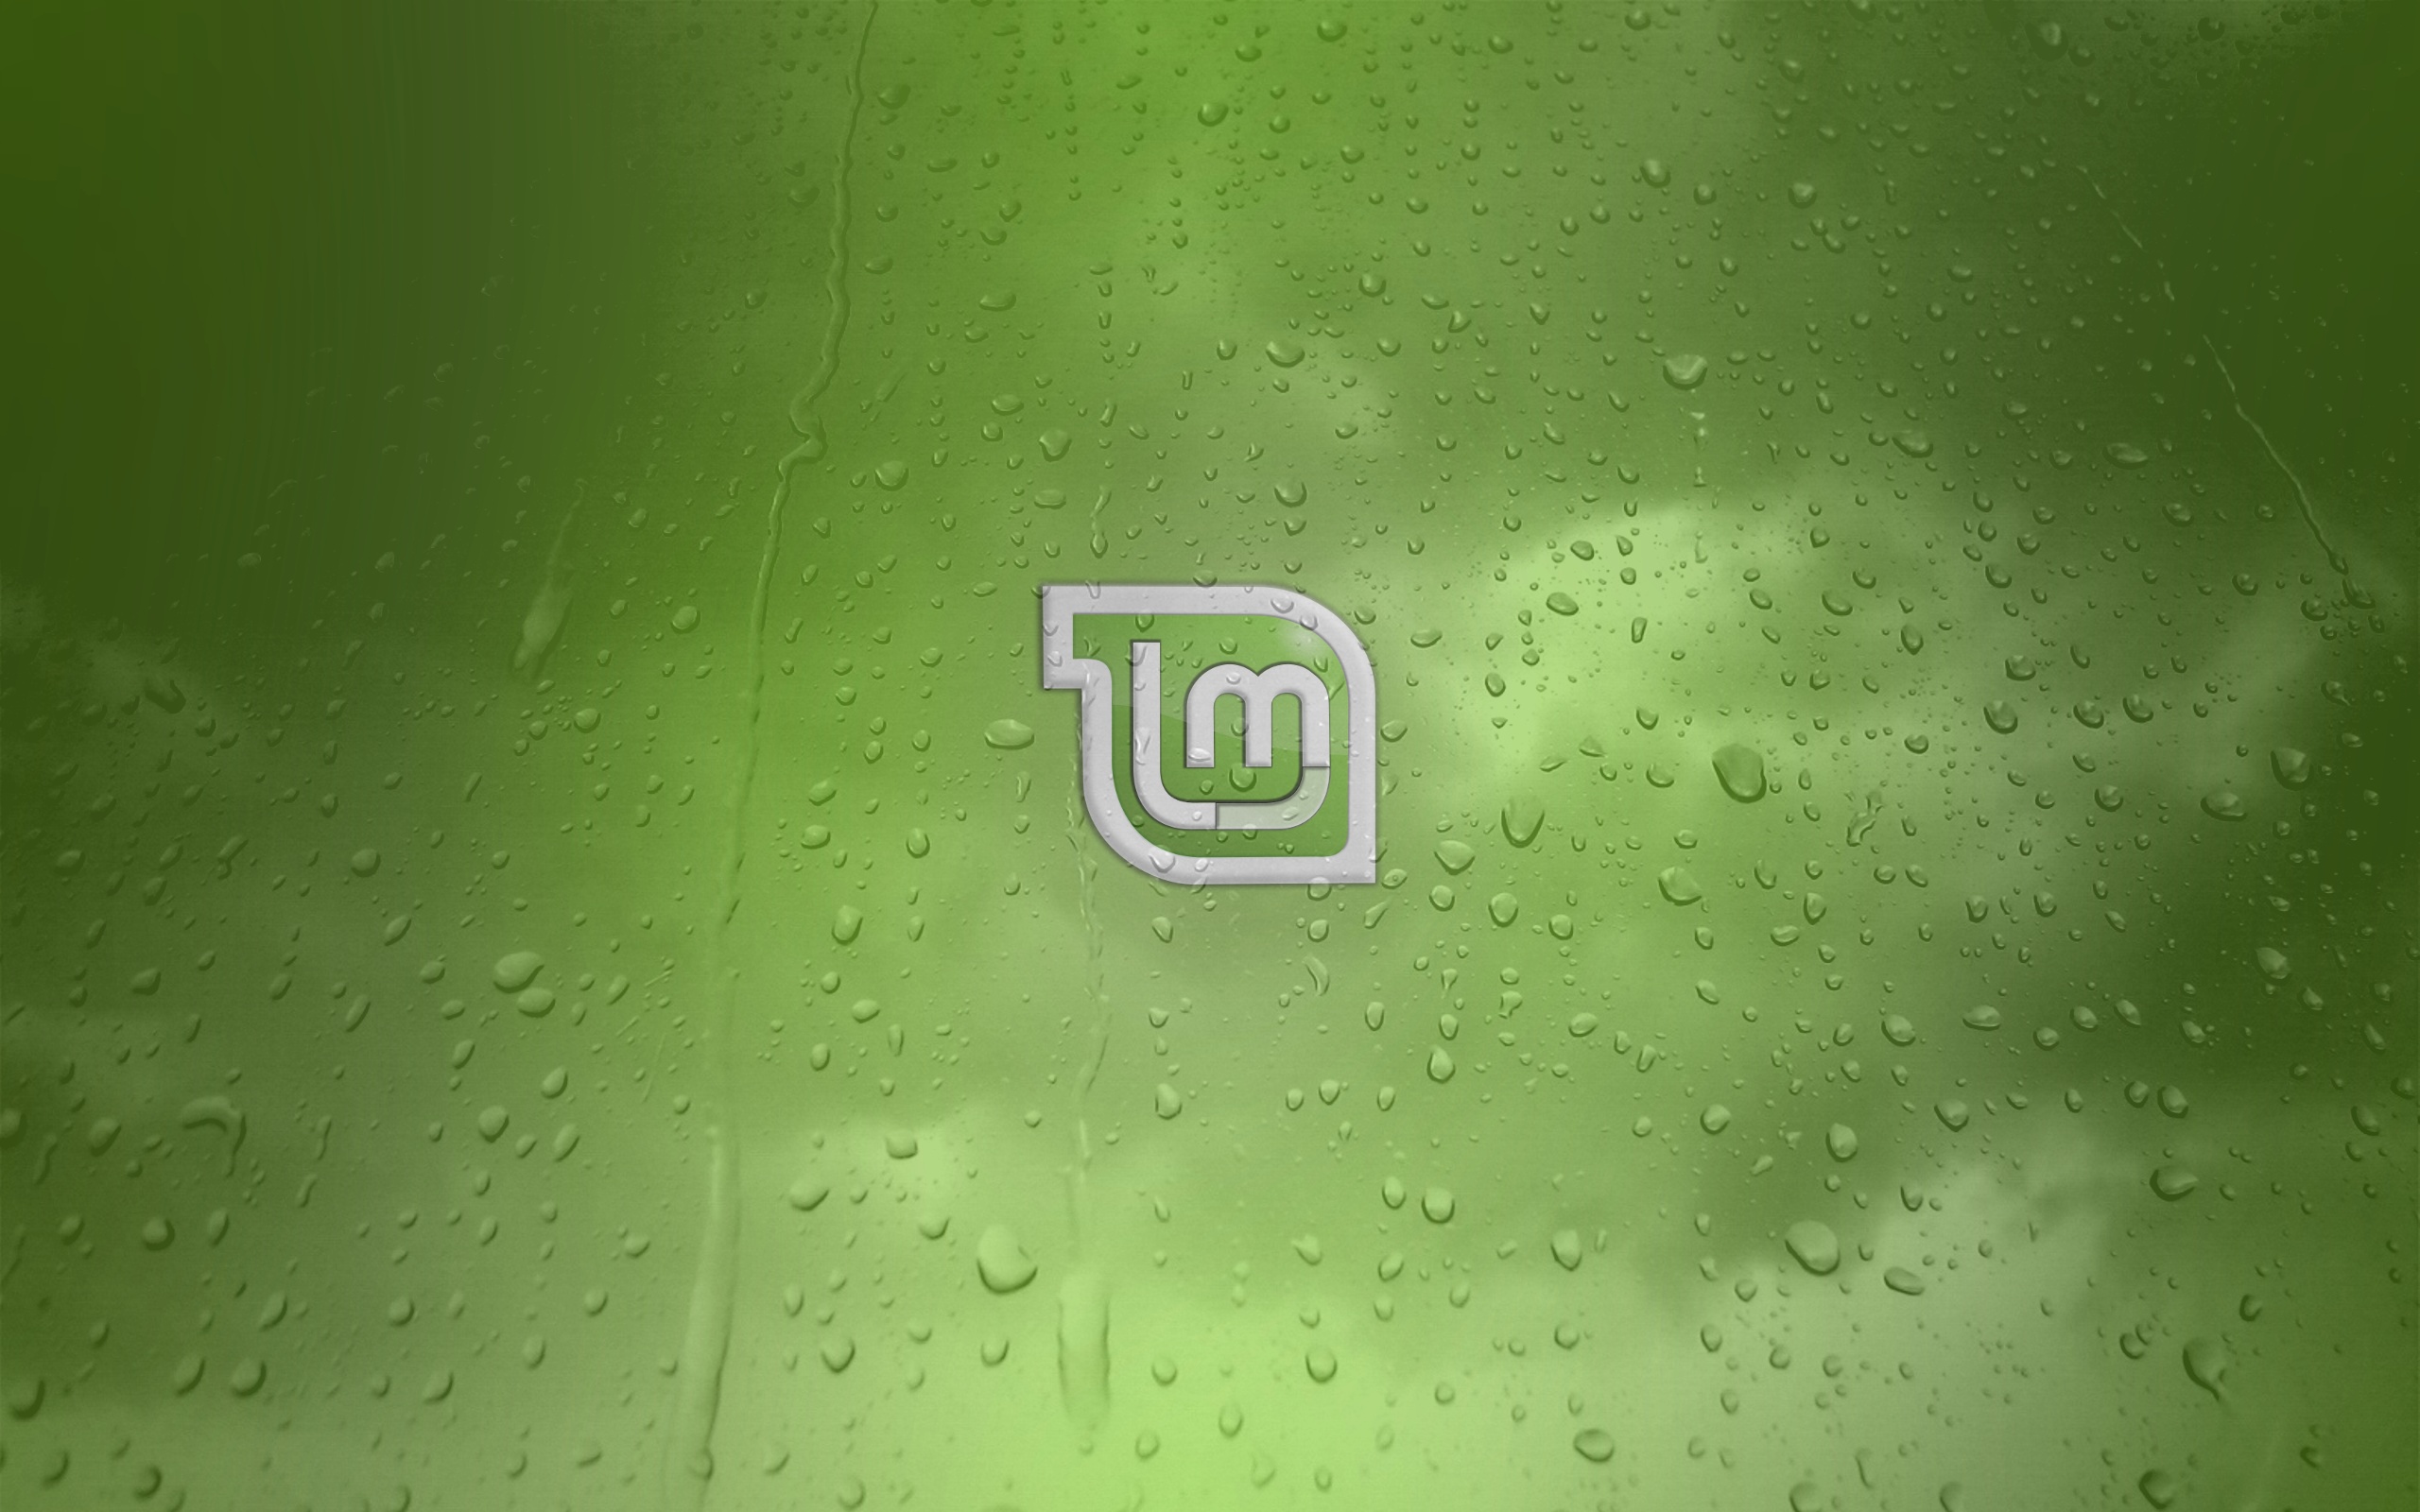 Linux mint Awesome Wallpapers